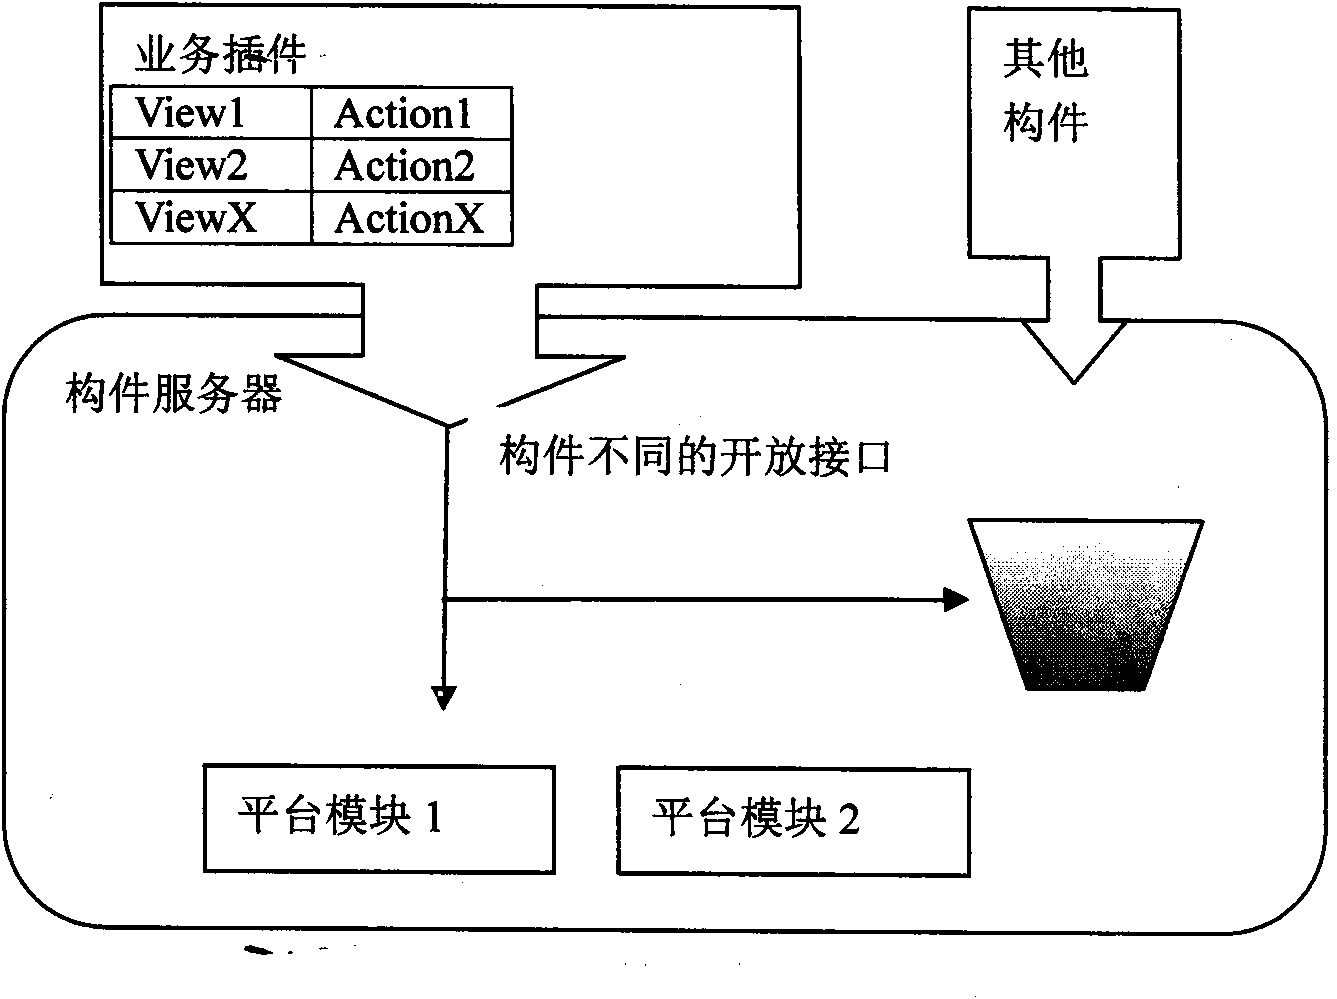 Non-uniform cooperative system and method based on component middleware platforms under network environment